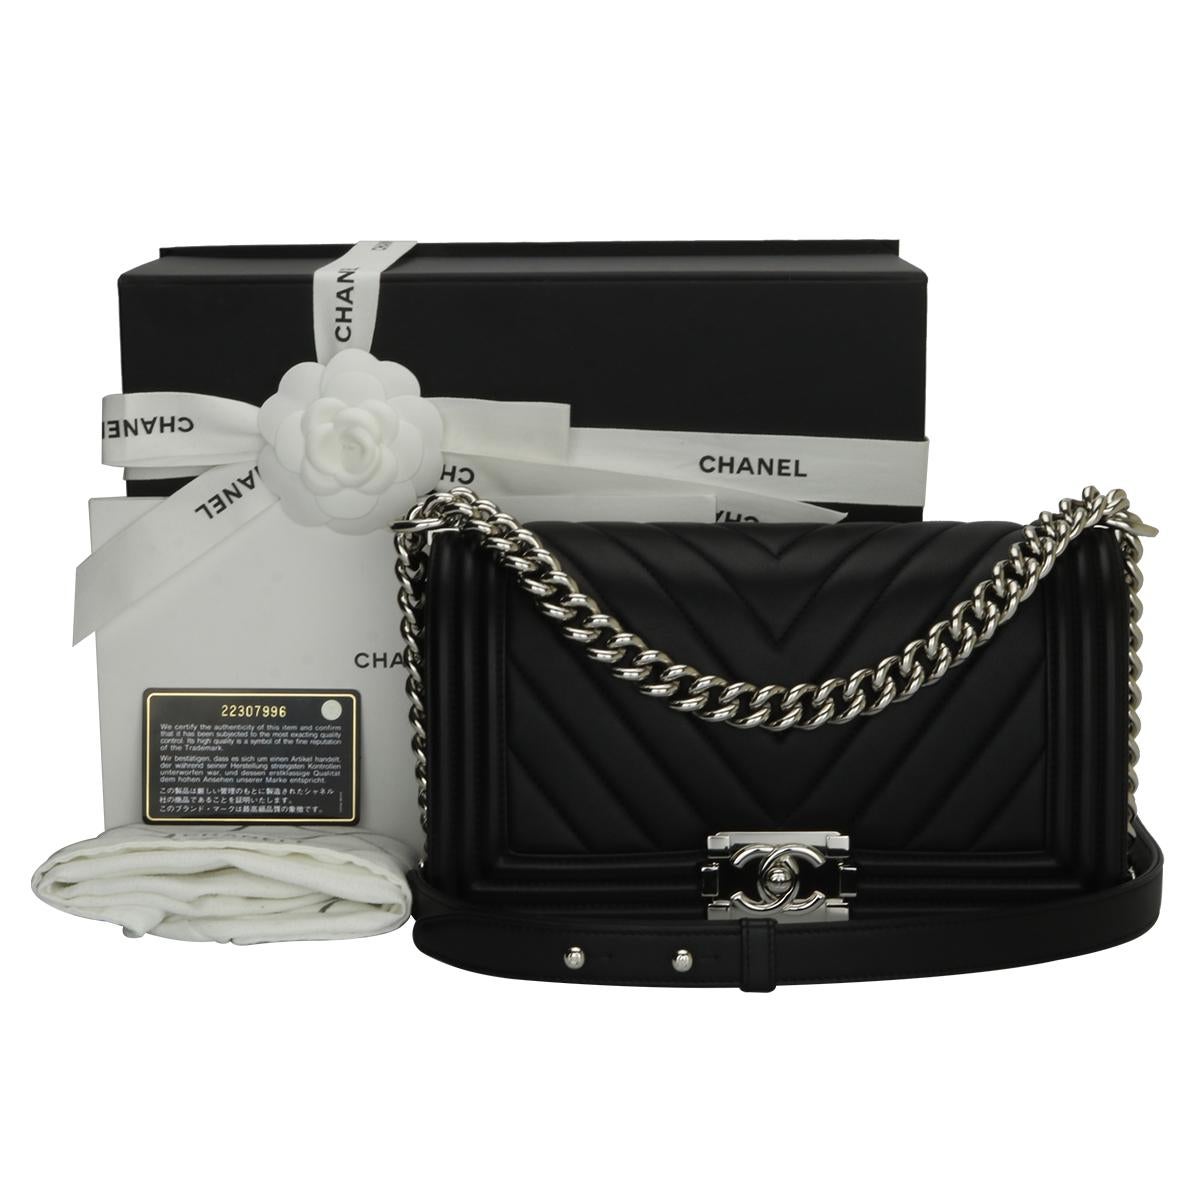 Authentic CHANEL Old Medium Chevron Boy Black Calfskin with Shiny Silver Hardware 2016.

This stunning bag is still in a mint condition; it still keeps its original shape and the hardware still very shiny.

Exterior Condition: Mint condition,